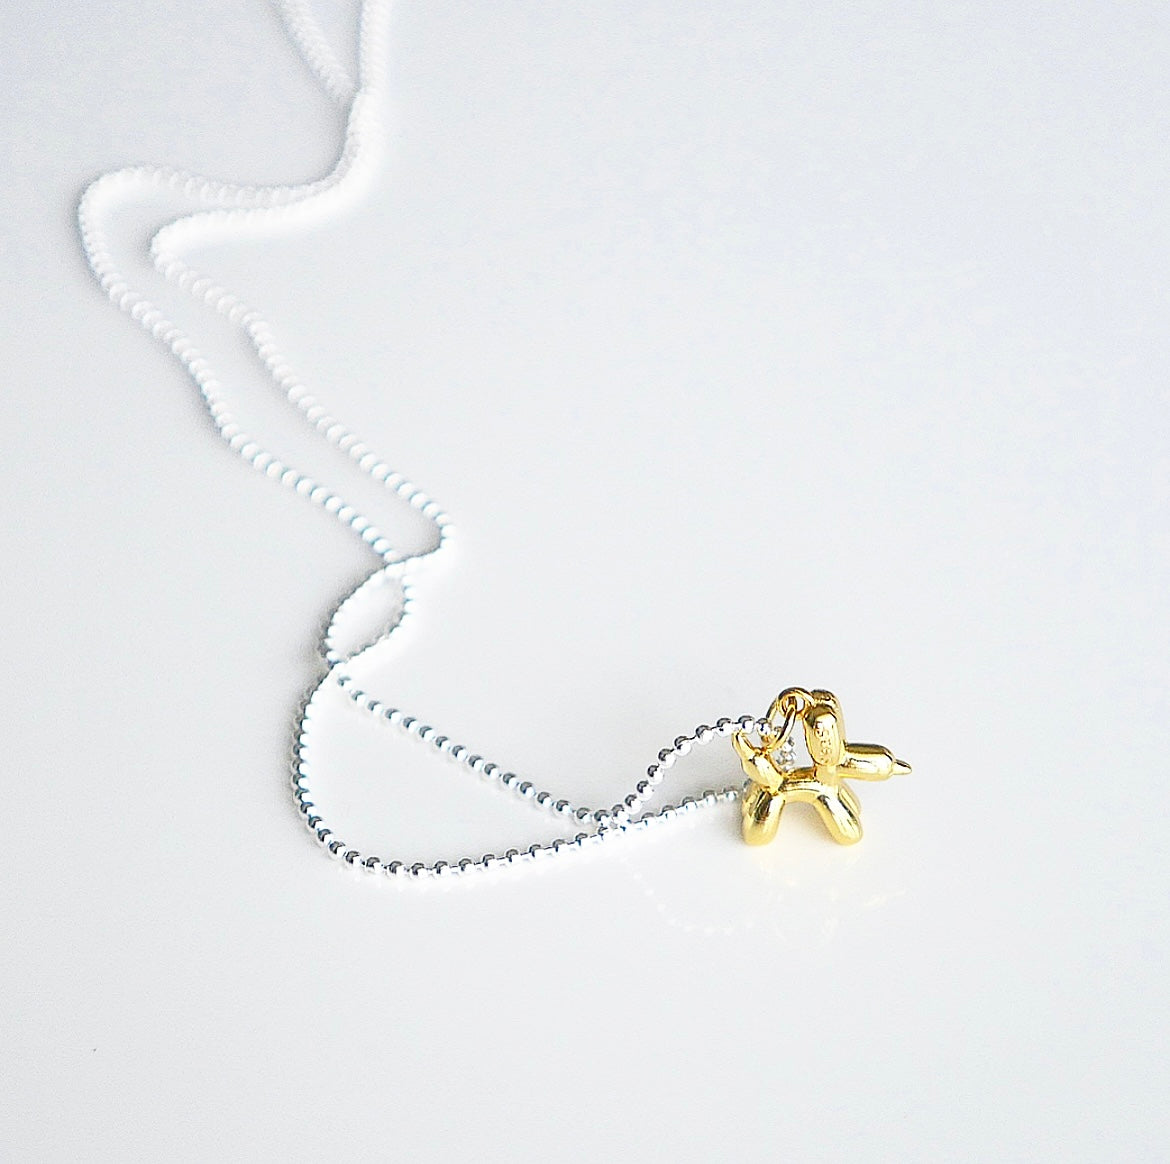 balloon dog necklace gold plated sterling silver waterproof dainty unique necklaces, dog lovers jewelry, dainty unique necklaces, trending, popular, influencer fashion trending on instagram and tiktok kesley boutique, jewelry store in Miami, brickell 